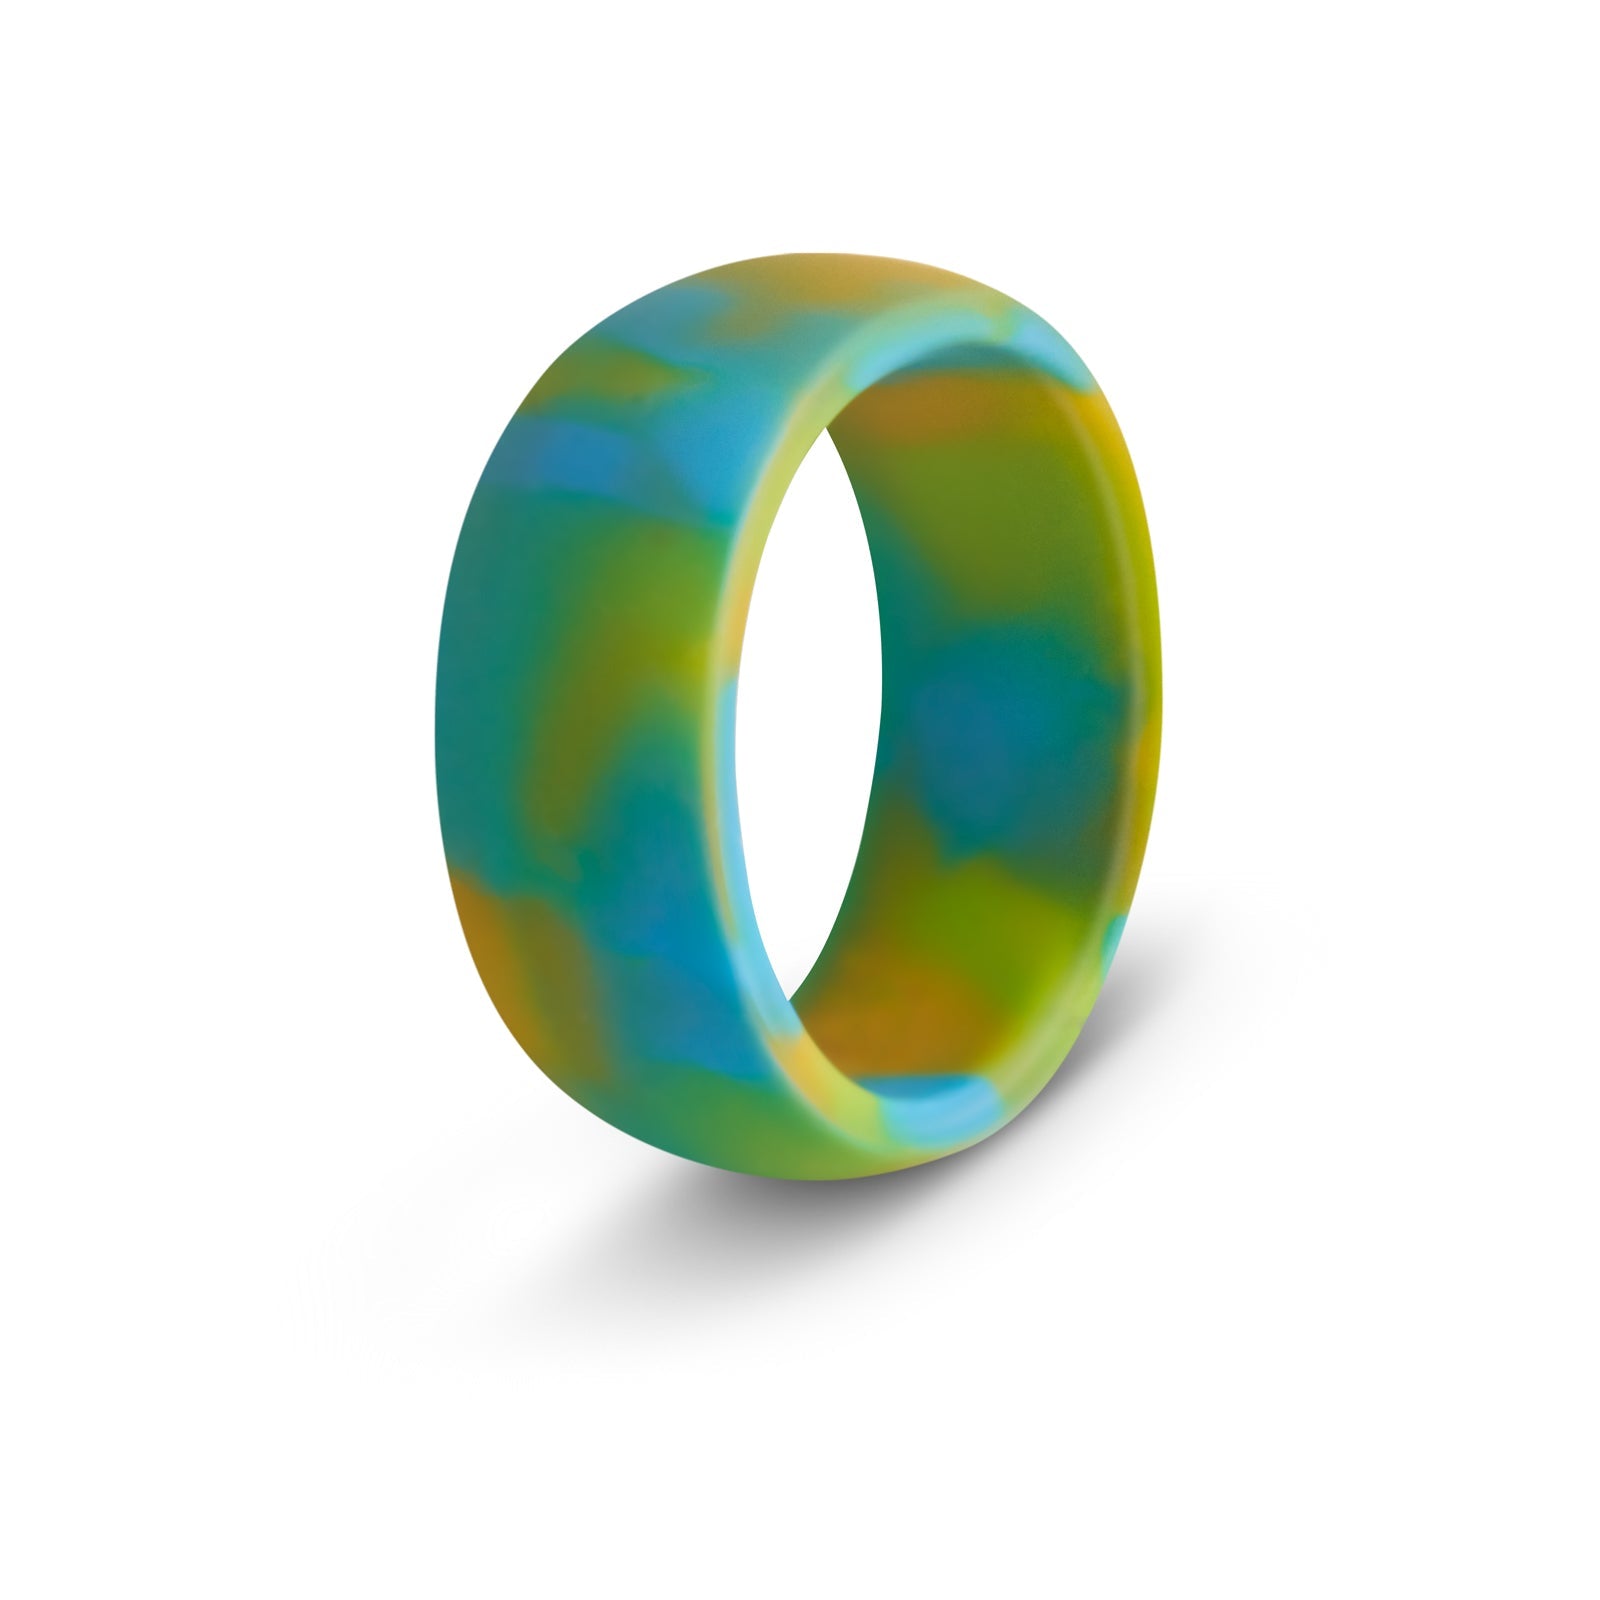 products/Botthms-Ring-_Botthms-ring-Green-Yellow-Camo.jpg